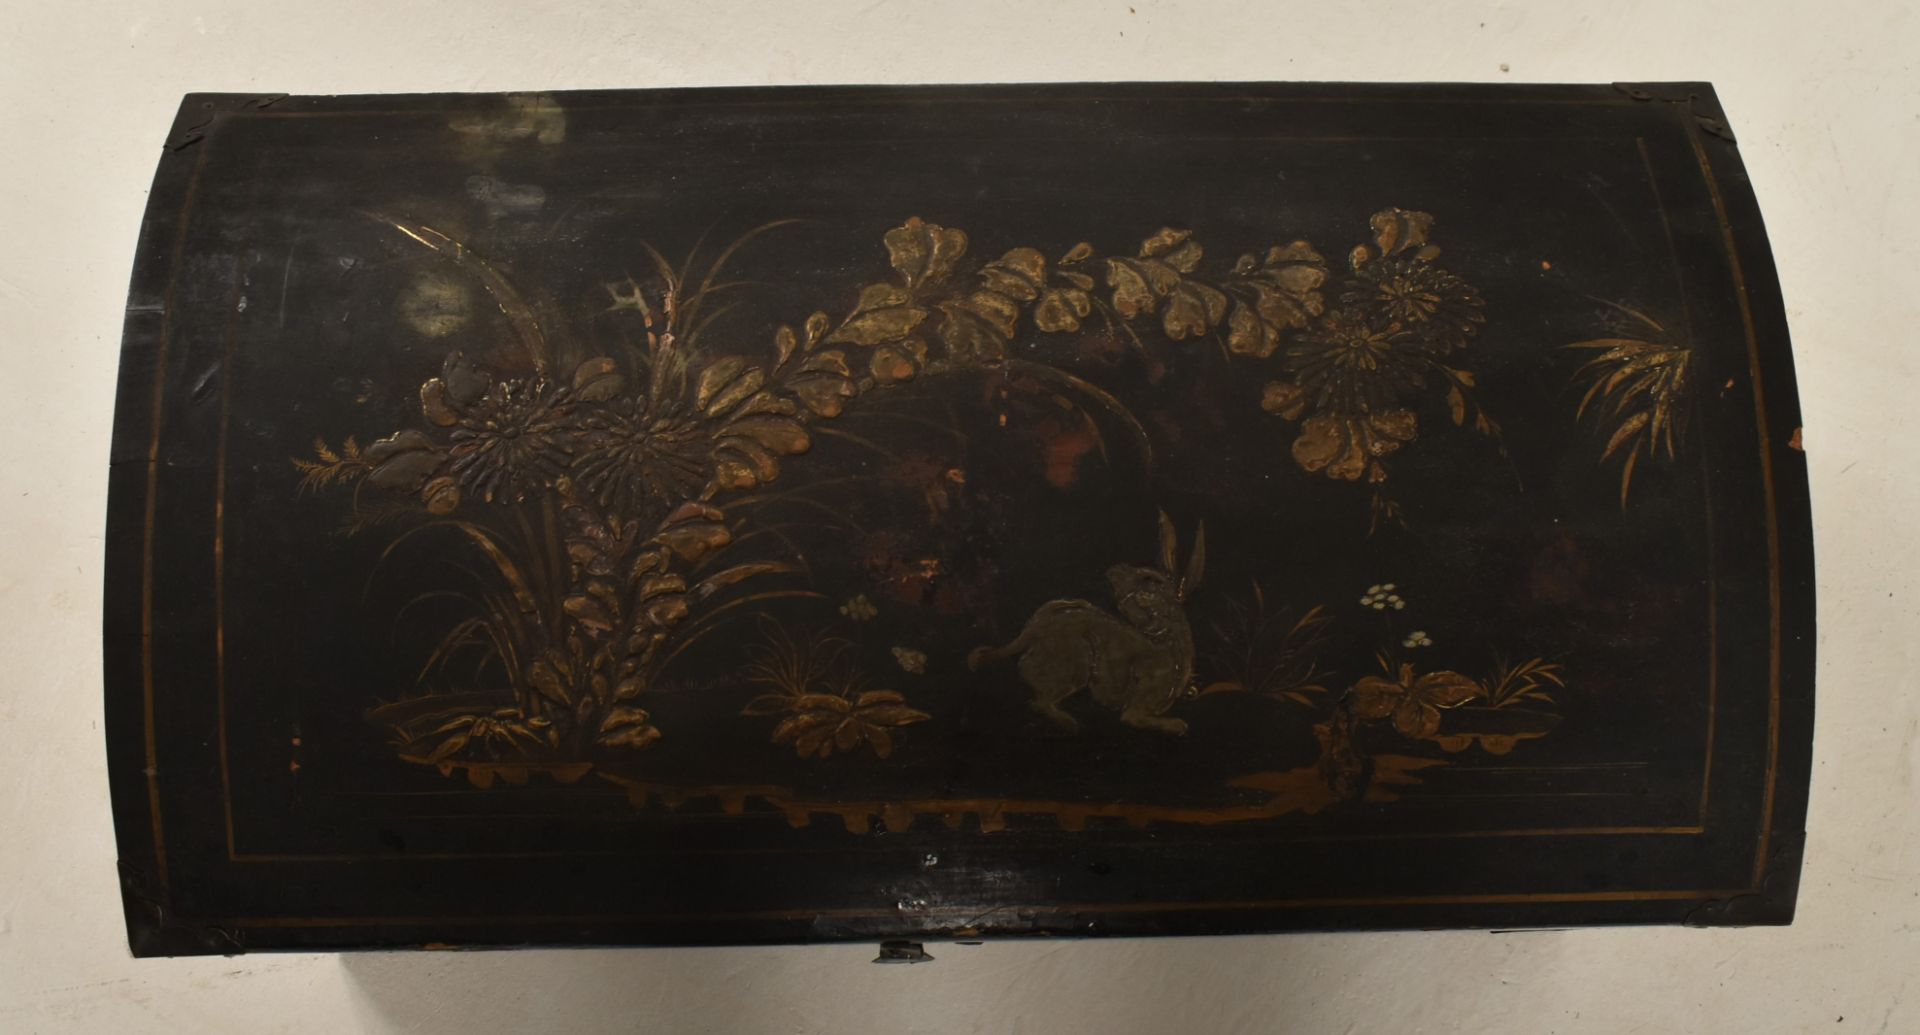 QING DYNASTY WOODEN LACQUERED STORAGE CHEST 清 富贵木宝箱 - Image 2 of 10